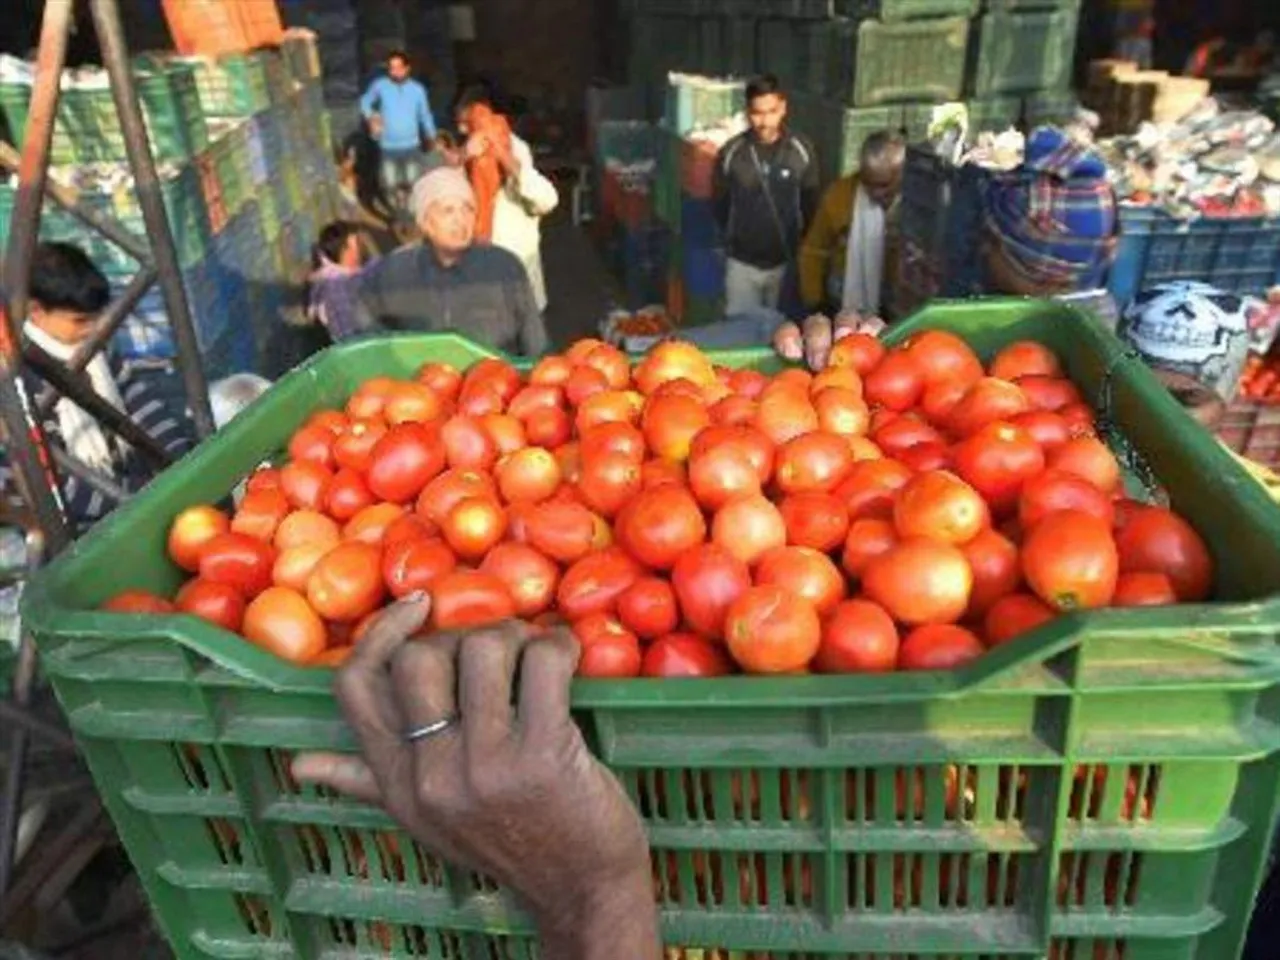 Tomatoes are falling in price